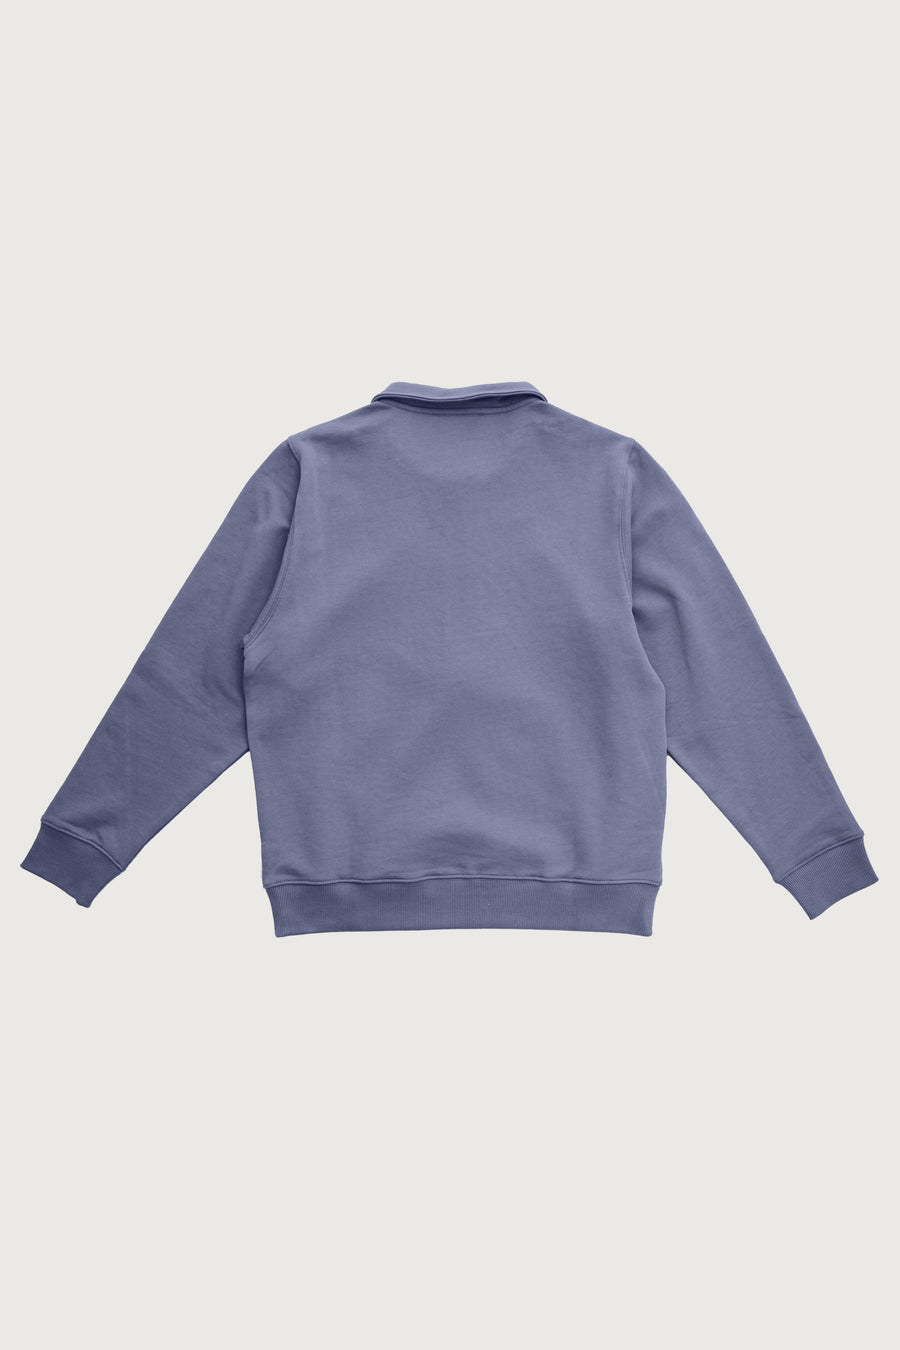 Quarter Zip Pullover + Space Blue - Little Puffy